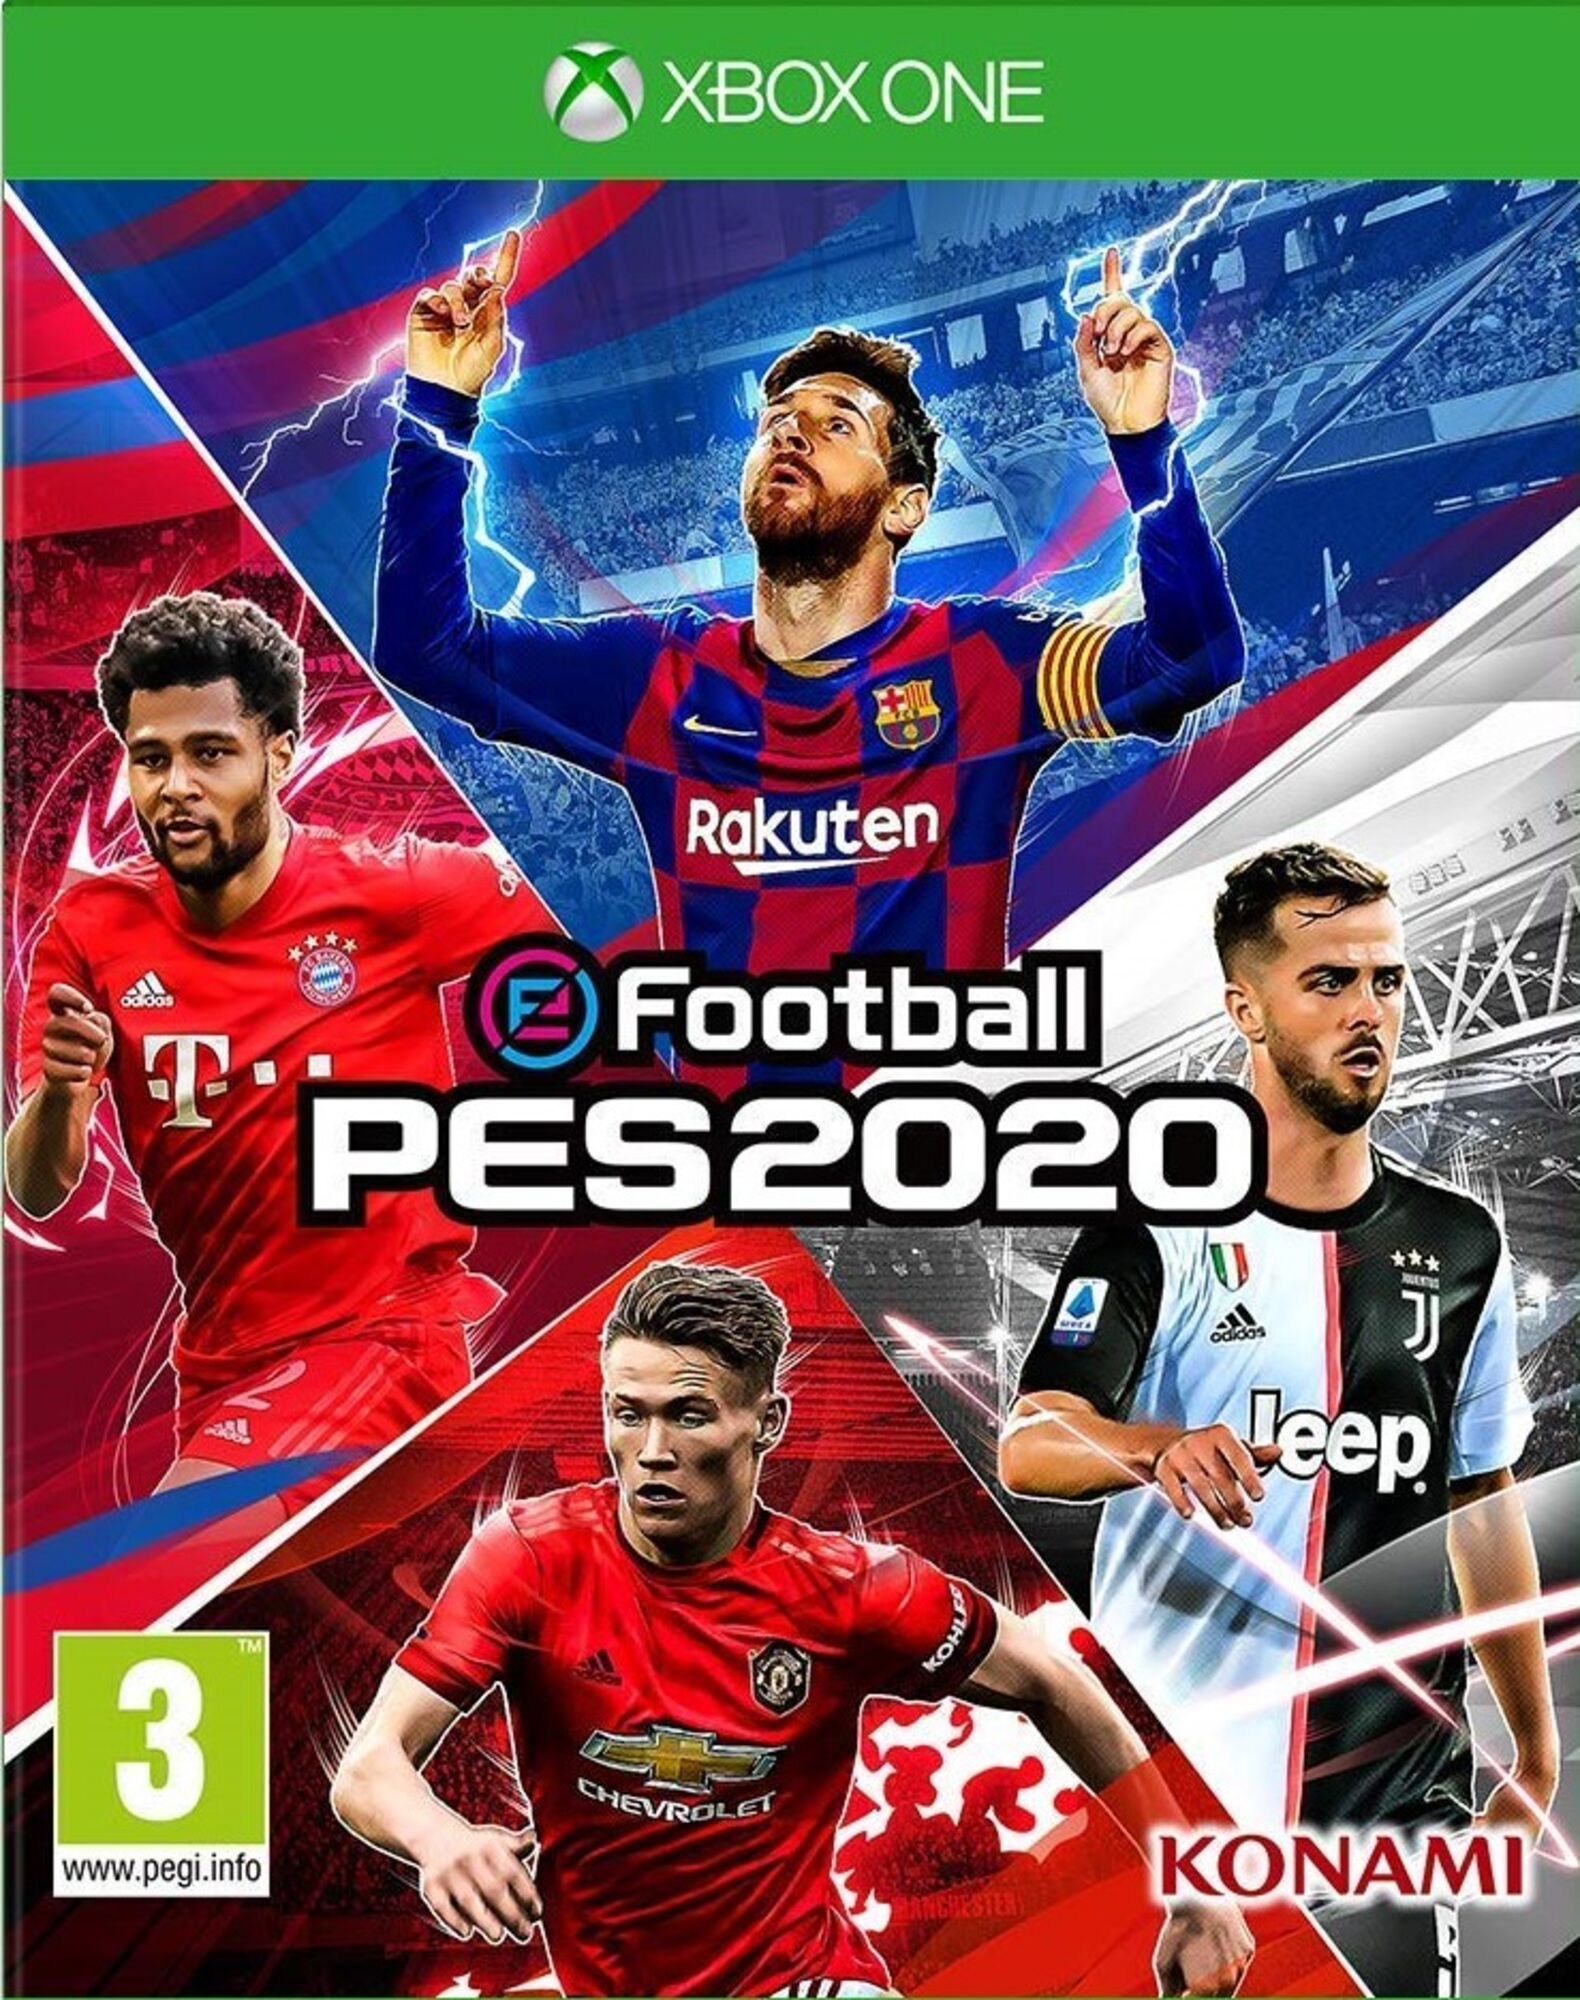 efootball 2022 download free